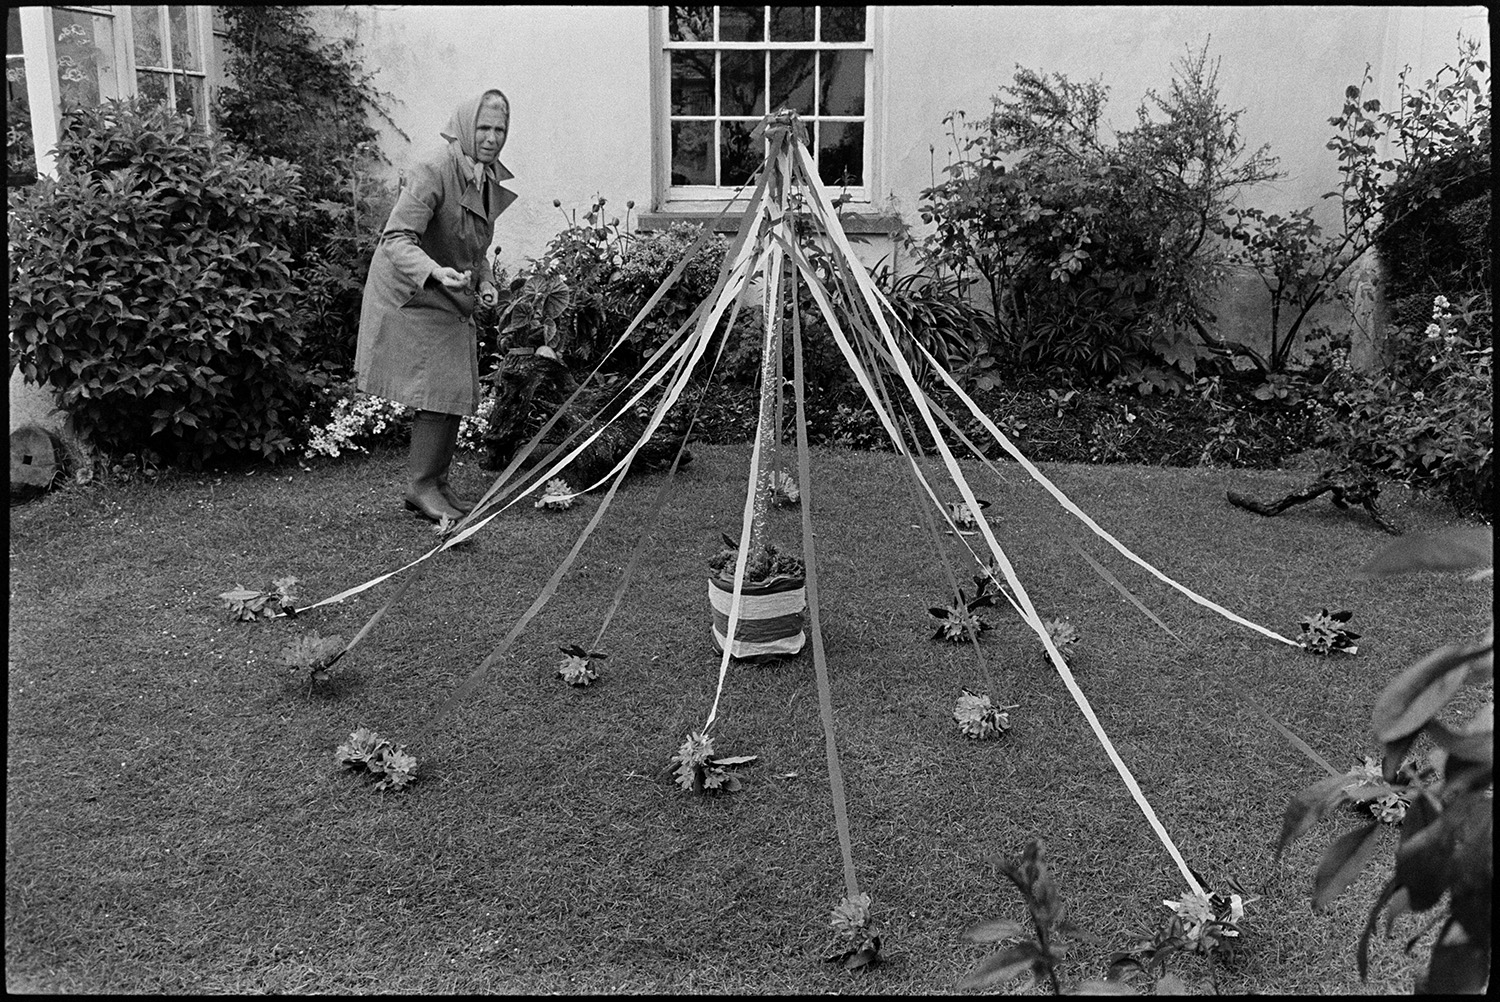 People decorating houses and gardens on Jubilee day! 
[Marge Knight decorating her garden at Arscotts, Dolton with a miniature maypole and flowers on Queen Elizabeth II Silver Jubilee day.]